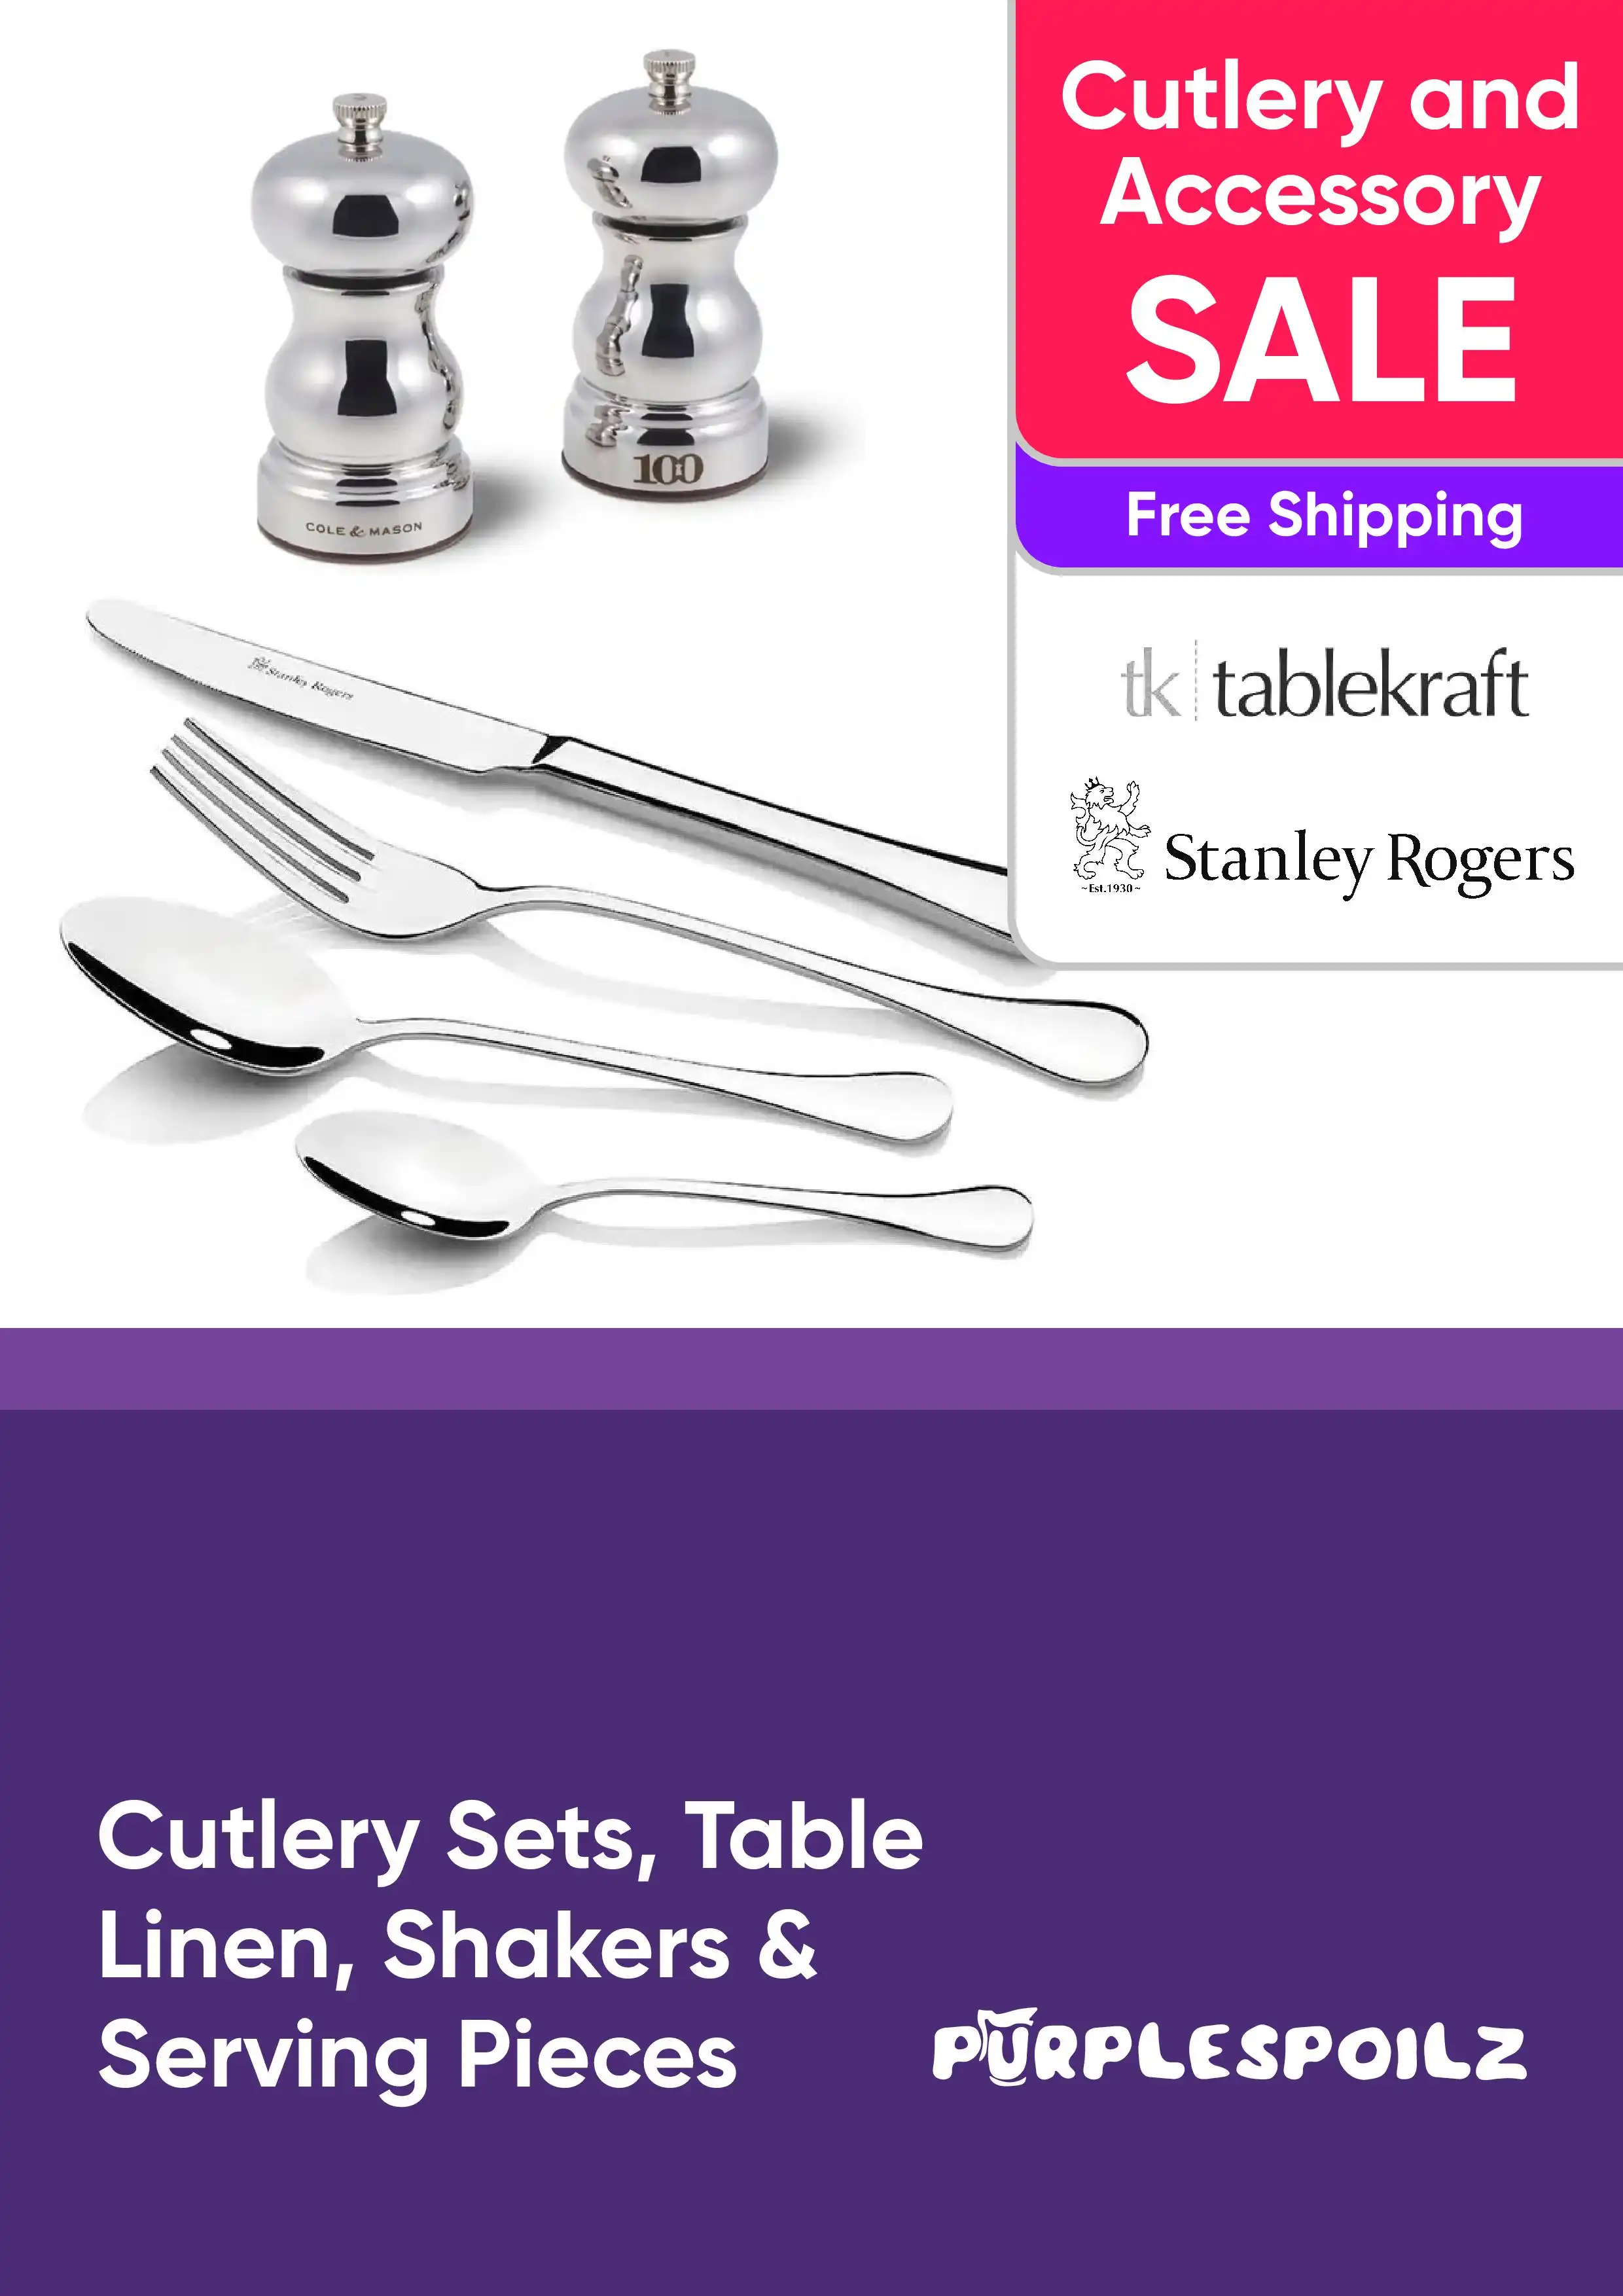 Cutlery Sets, Shakers, Serving Pieces and More - Free Shipping